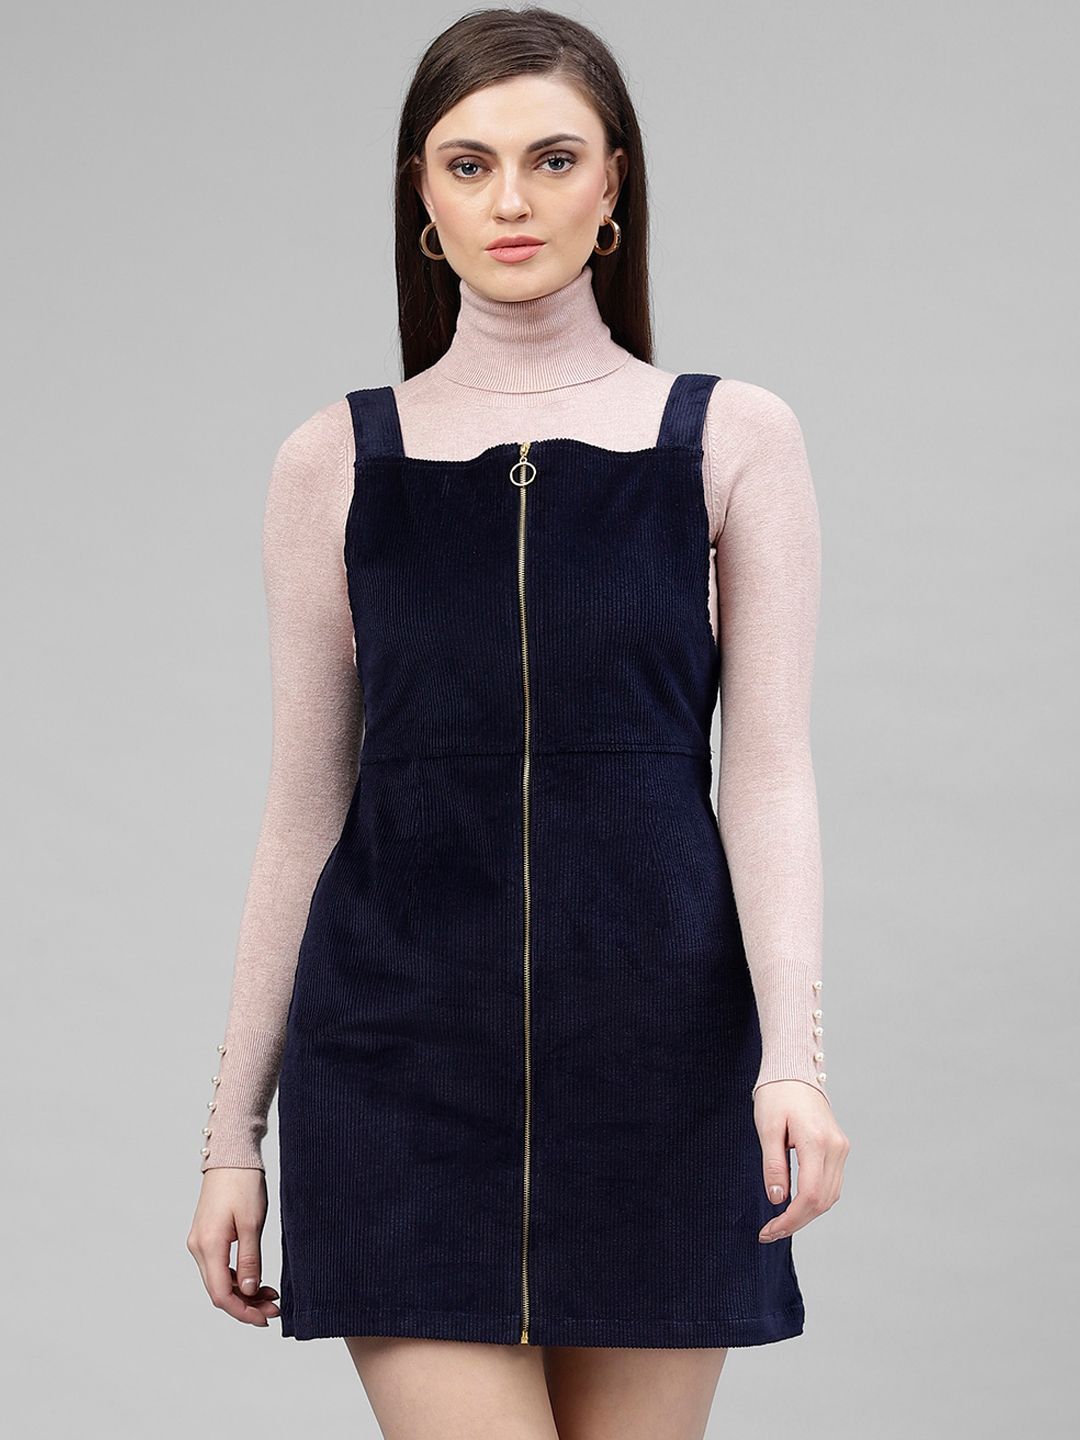 KASSUALLY Women Navy Blue Solid Sheath Dress Price in India